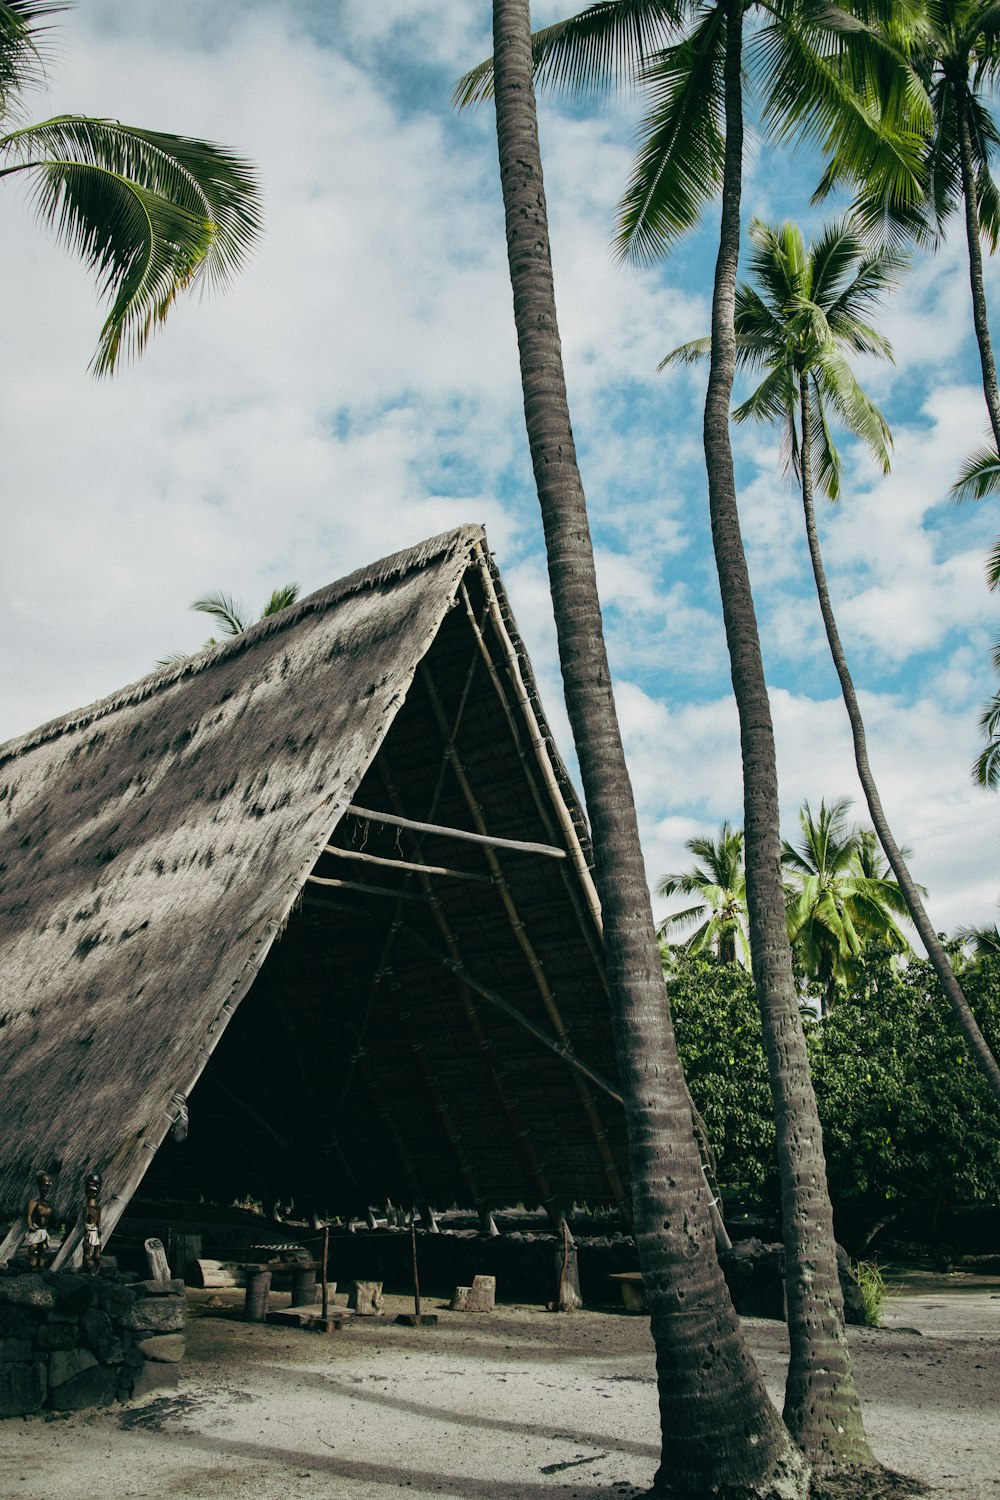 a hut with a thatched roof surrounded by palm trees